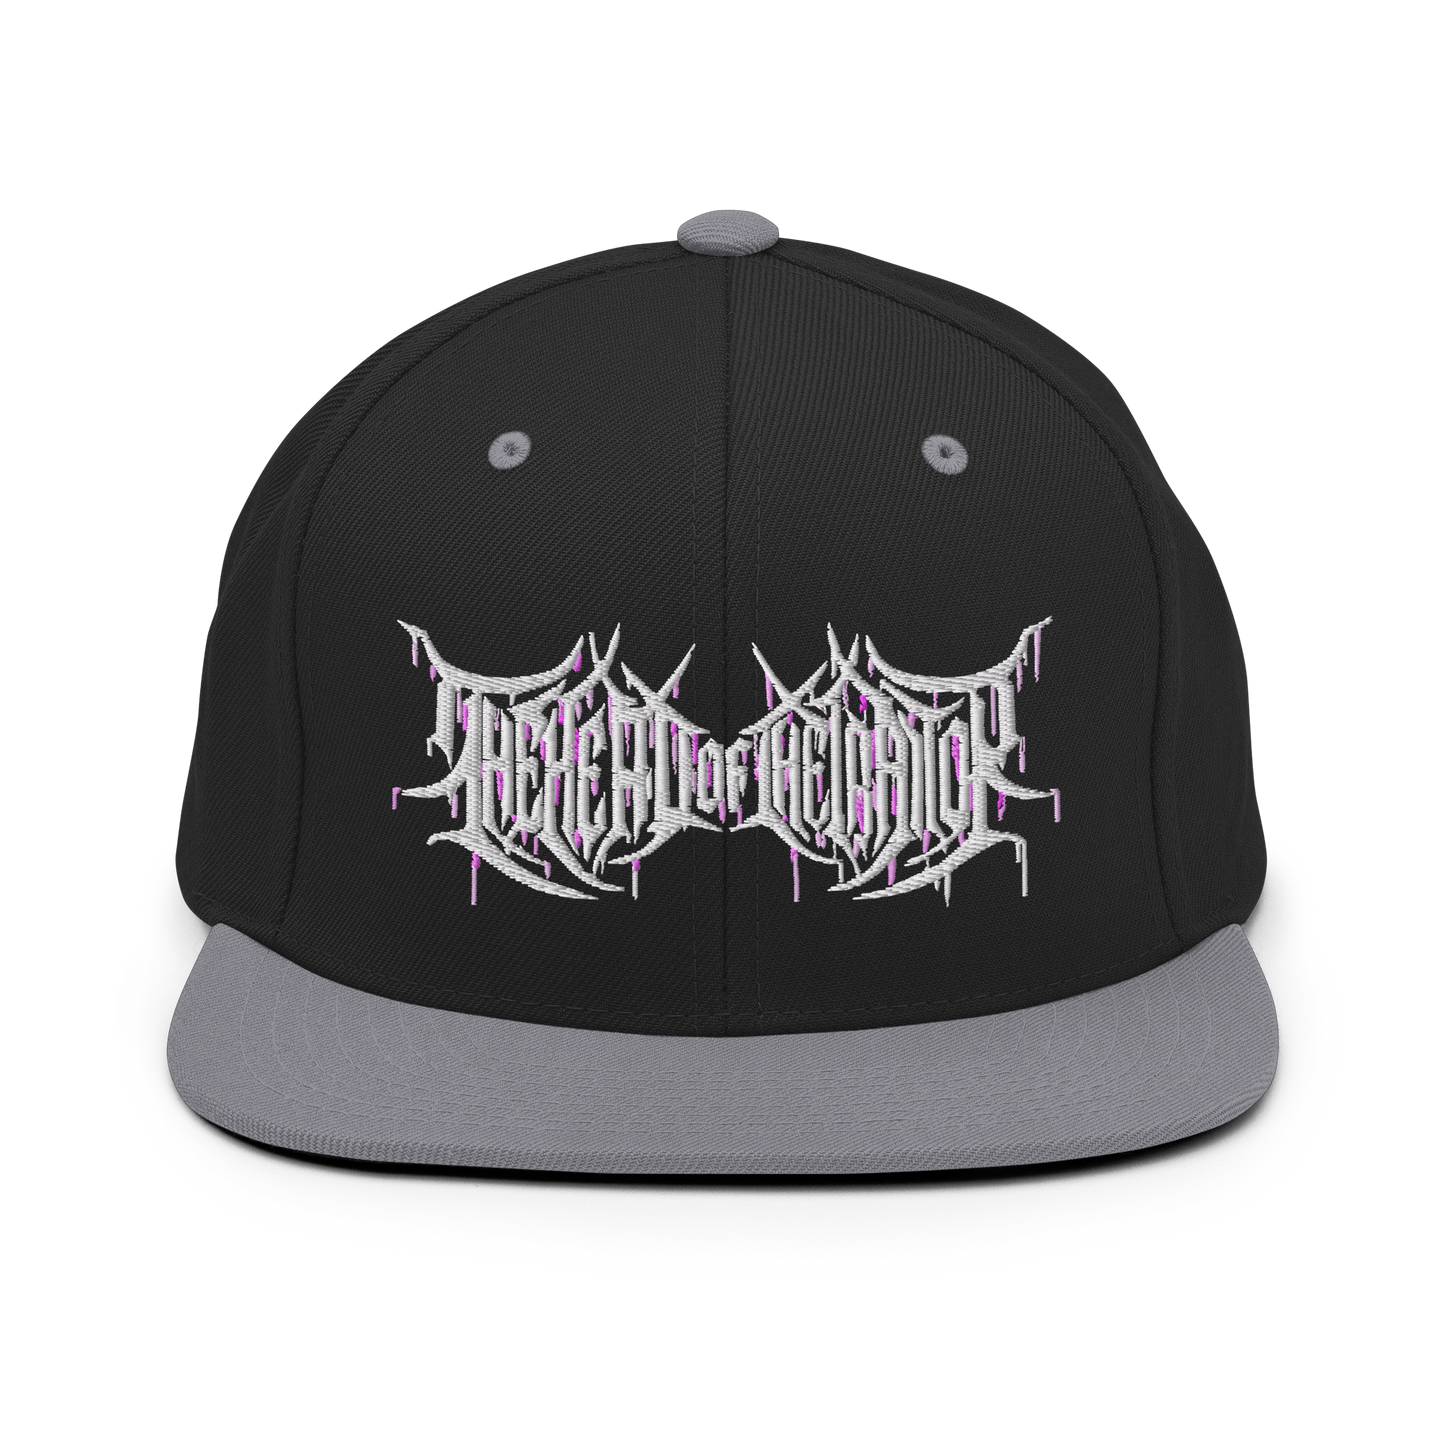 The Head of The Traitor "The Logo" - Snapback Hat